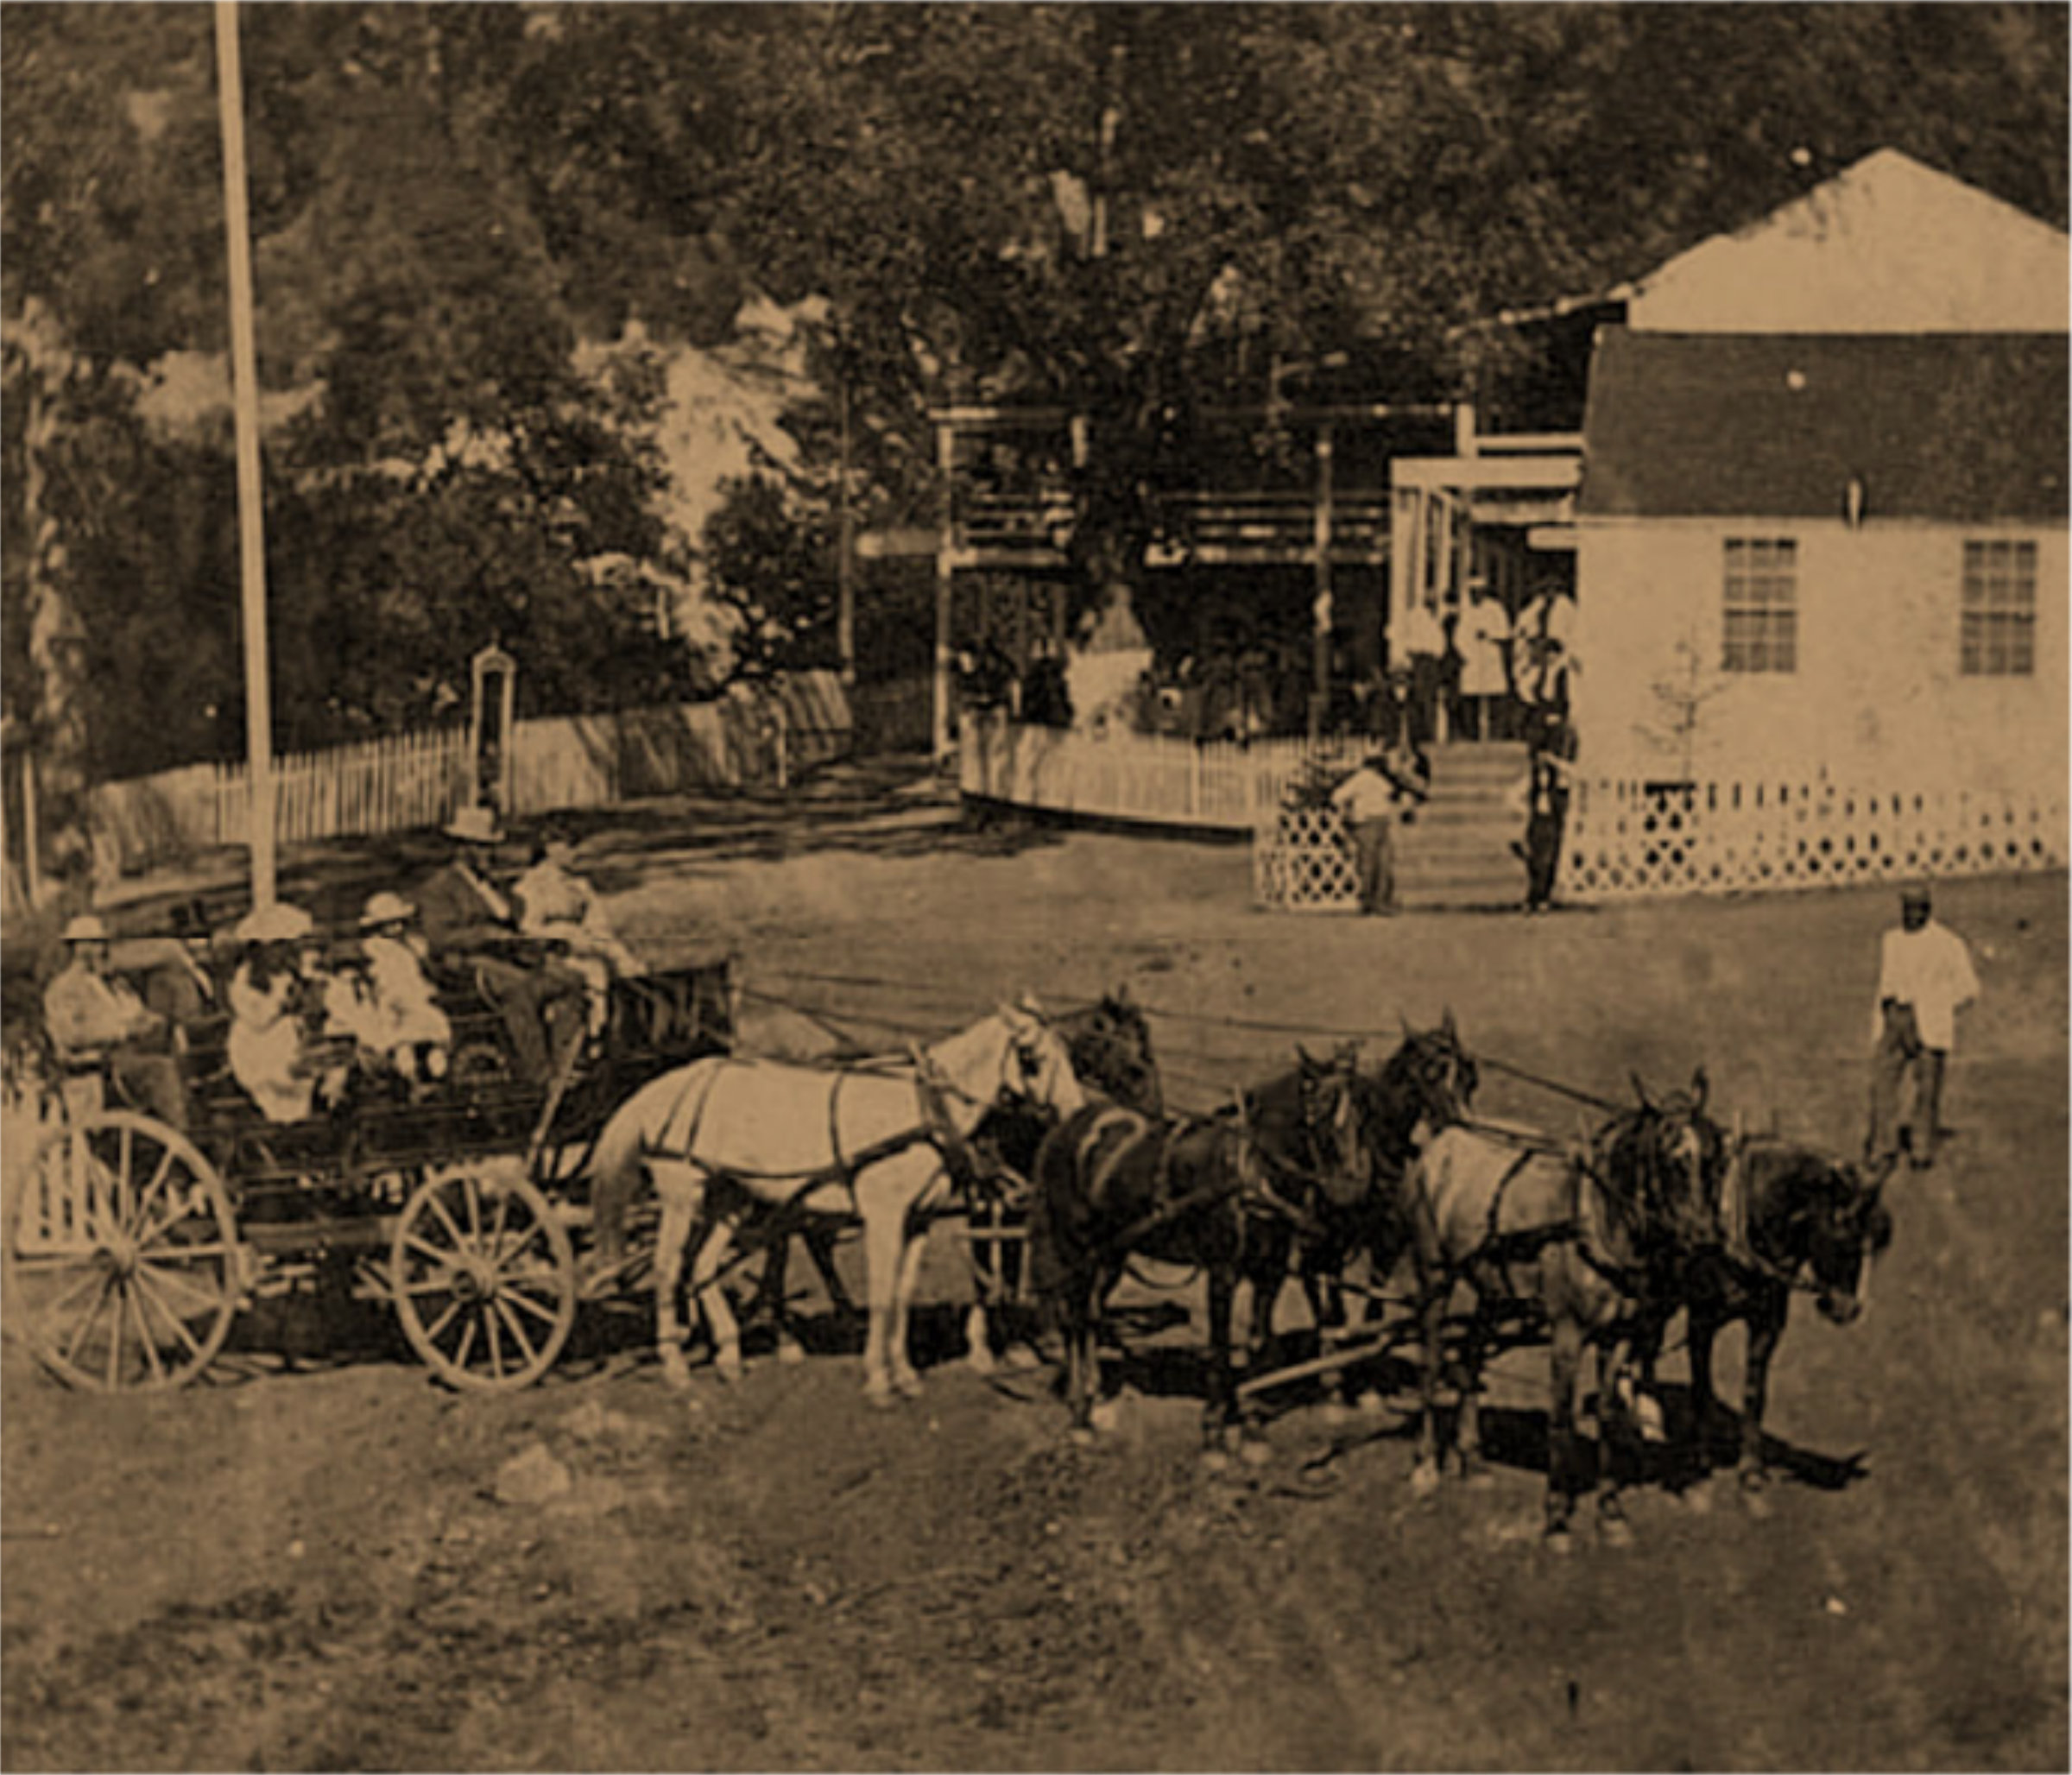 Archival photo of Foss with passengers in horse-drawn cart